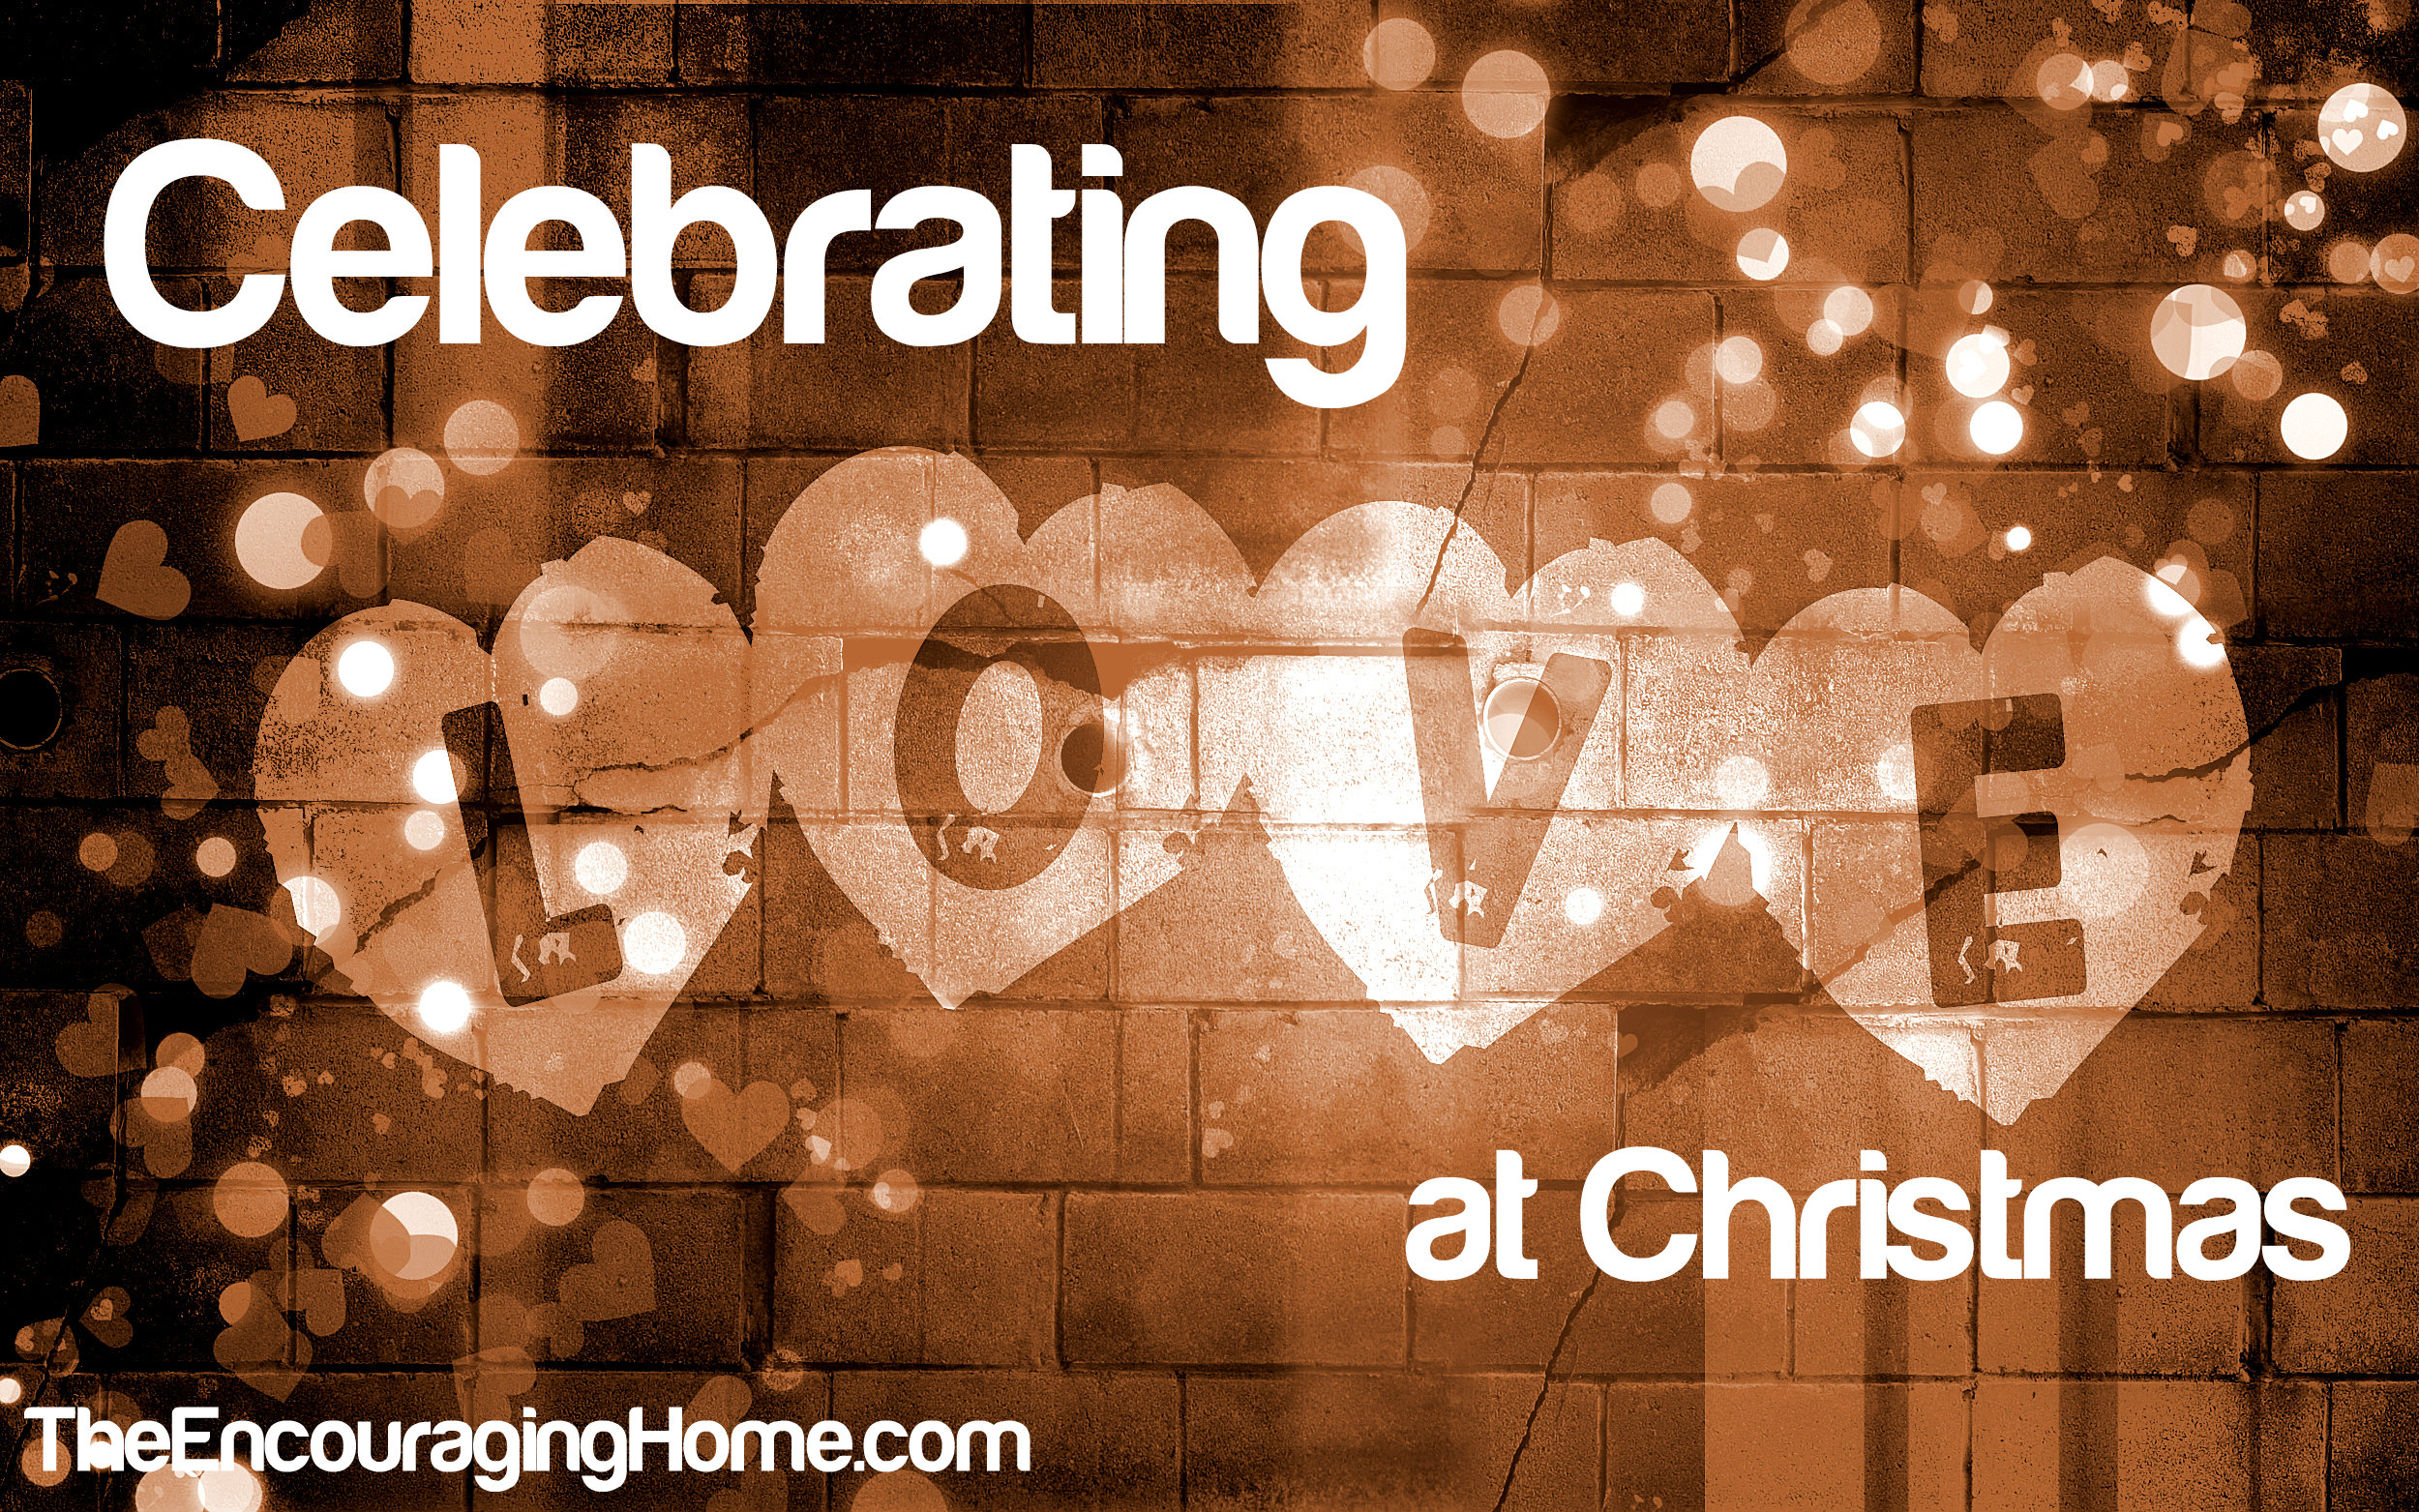 Celebrating Love at Christmas | The Encouraging Home